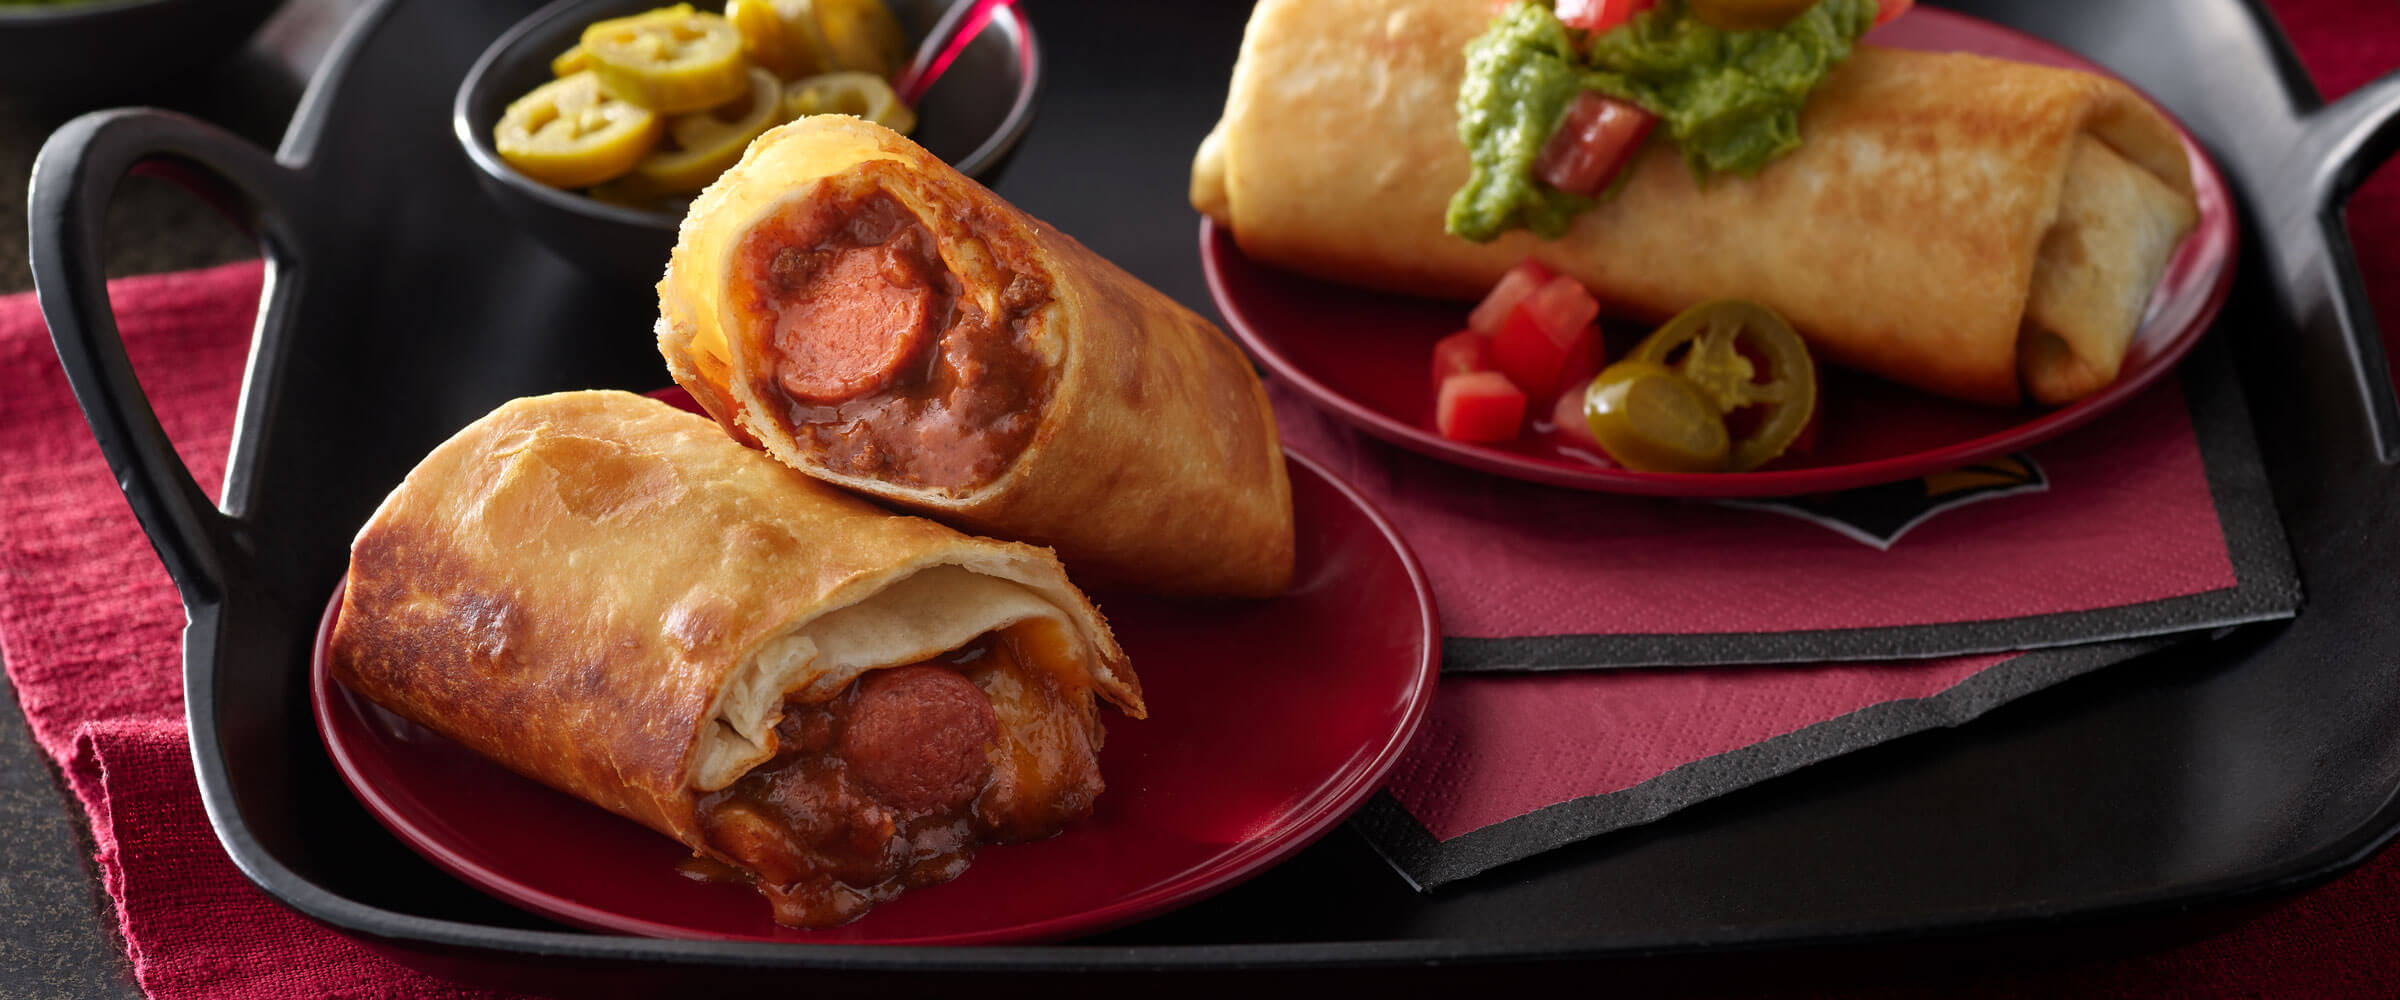 Chili Cheese Dog Chimichangas on black platter with red napkins